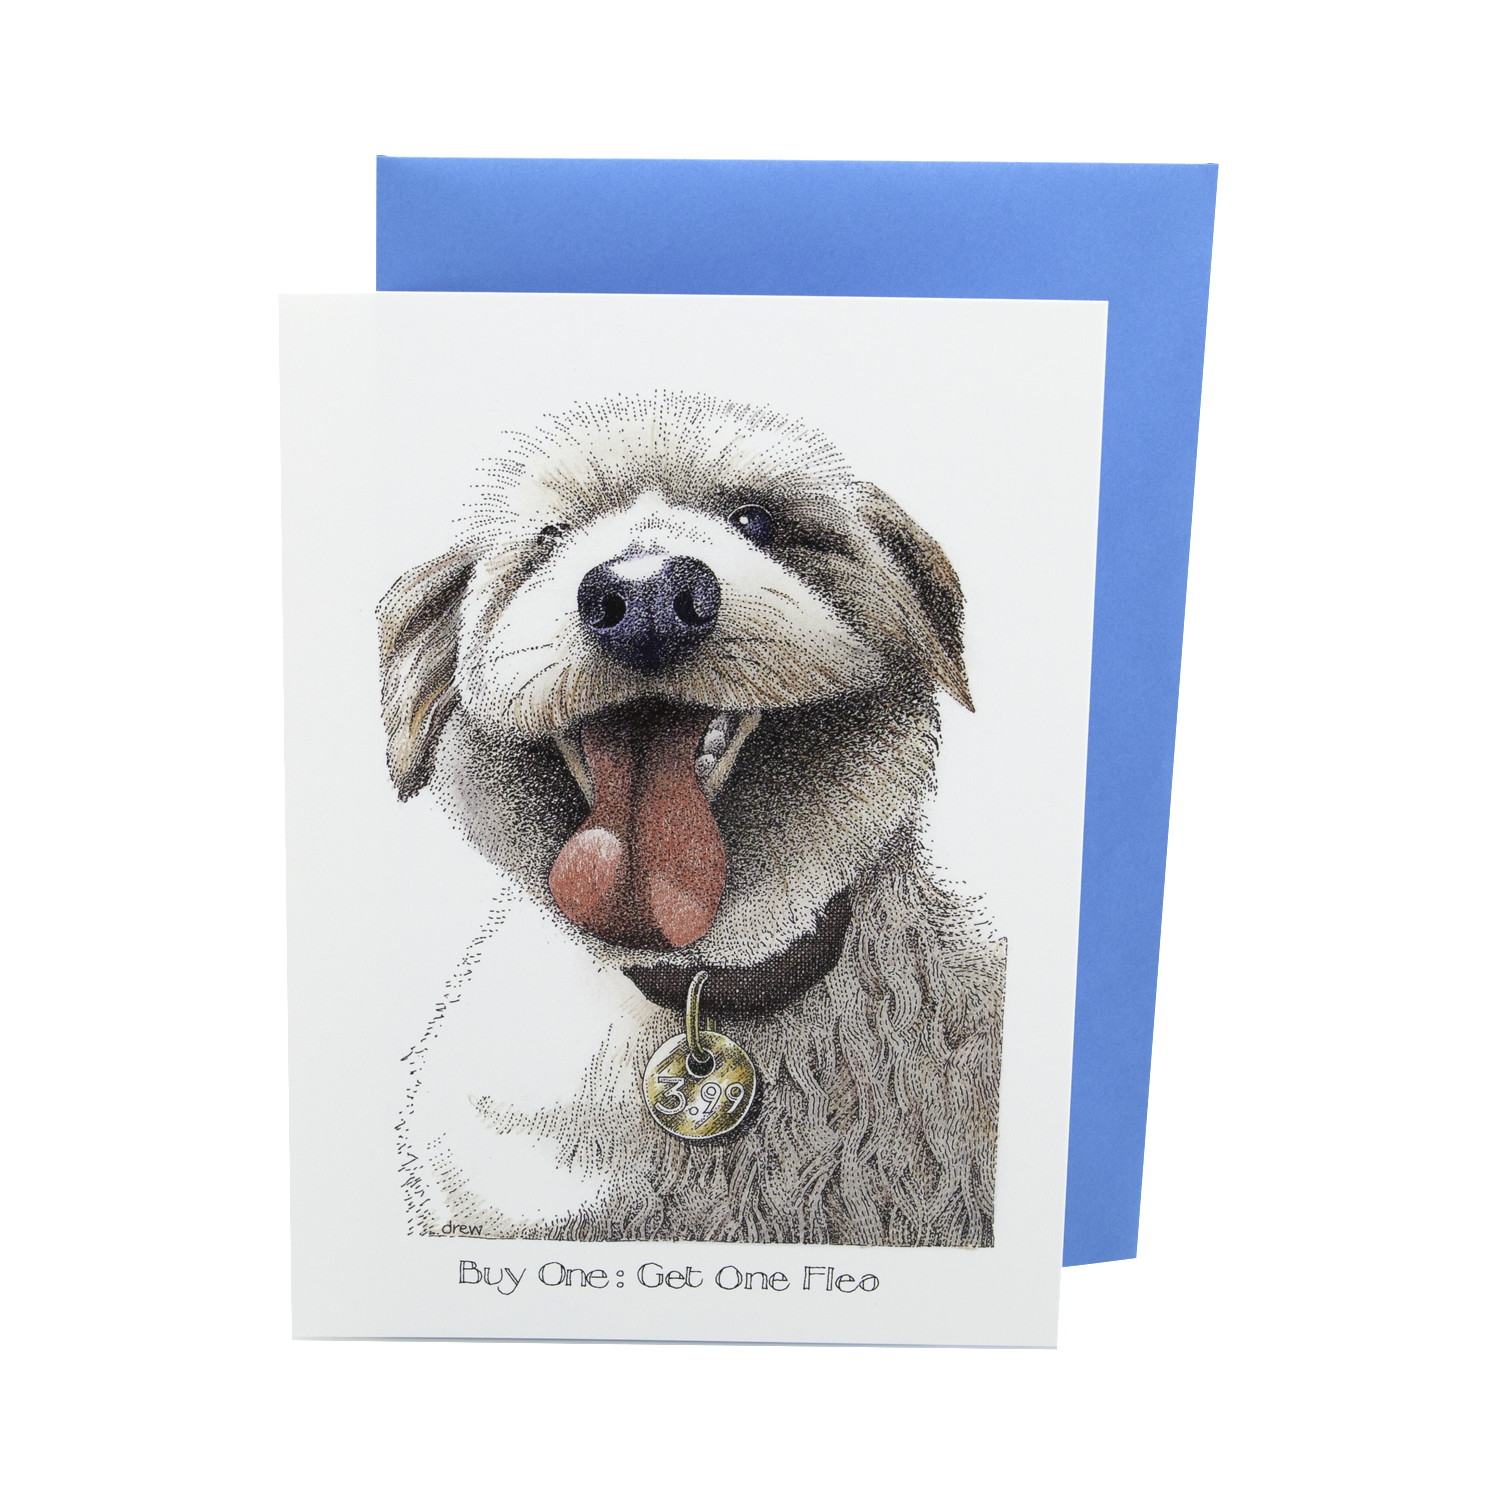 Dog Lover Cards, Gifts and merchandise available at Dog Krazy Gifts – Simon Drew Buy One Get One Flea, Humorous card featuring a Cockerpoo. Part ofthe Simon Drew Dog Collection available from Dog Krazy Gifts